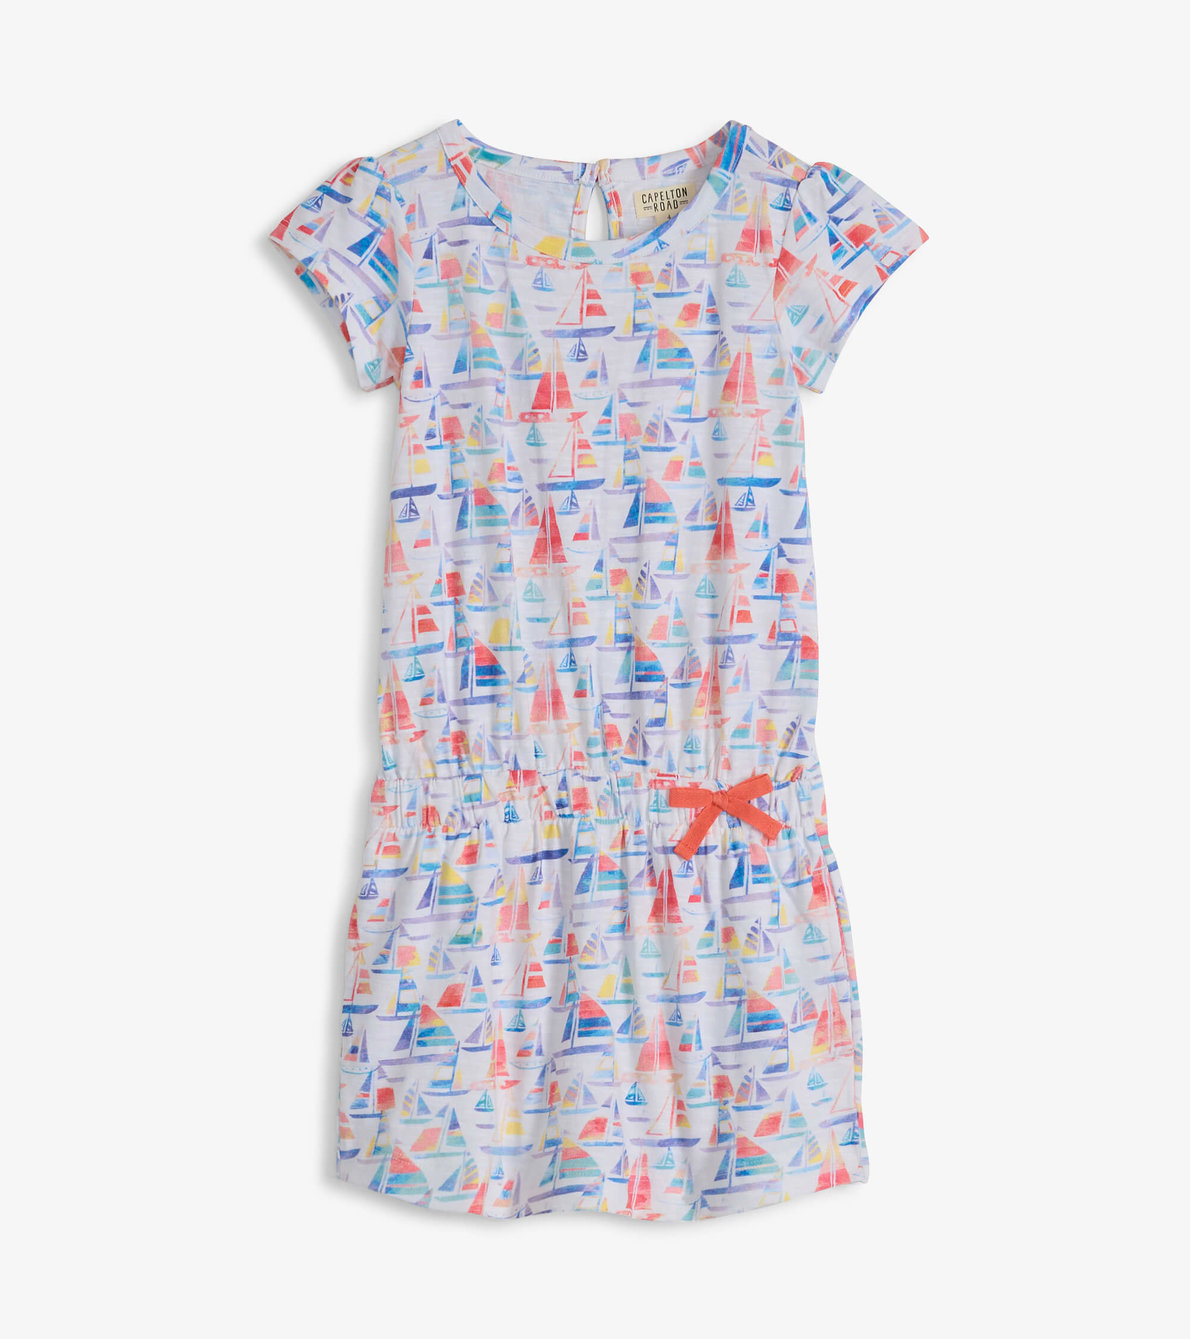 View larger image of Girls Painted Sailboats Tee Dress